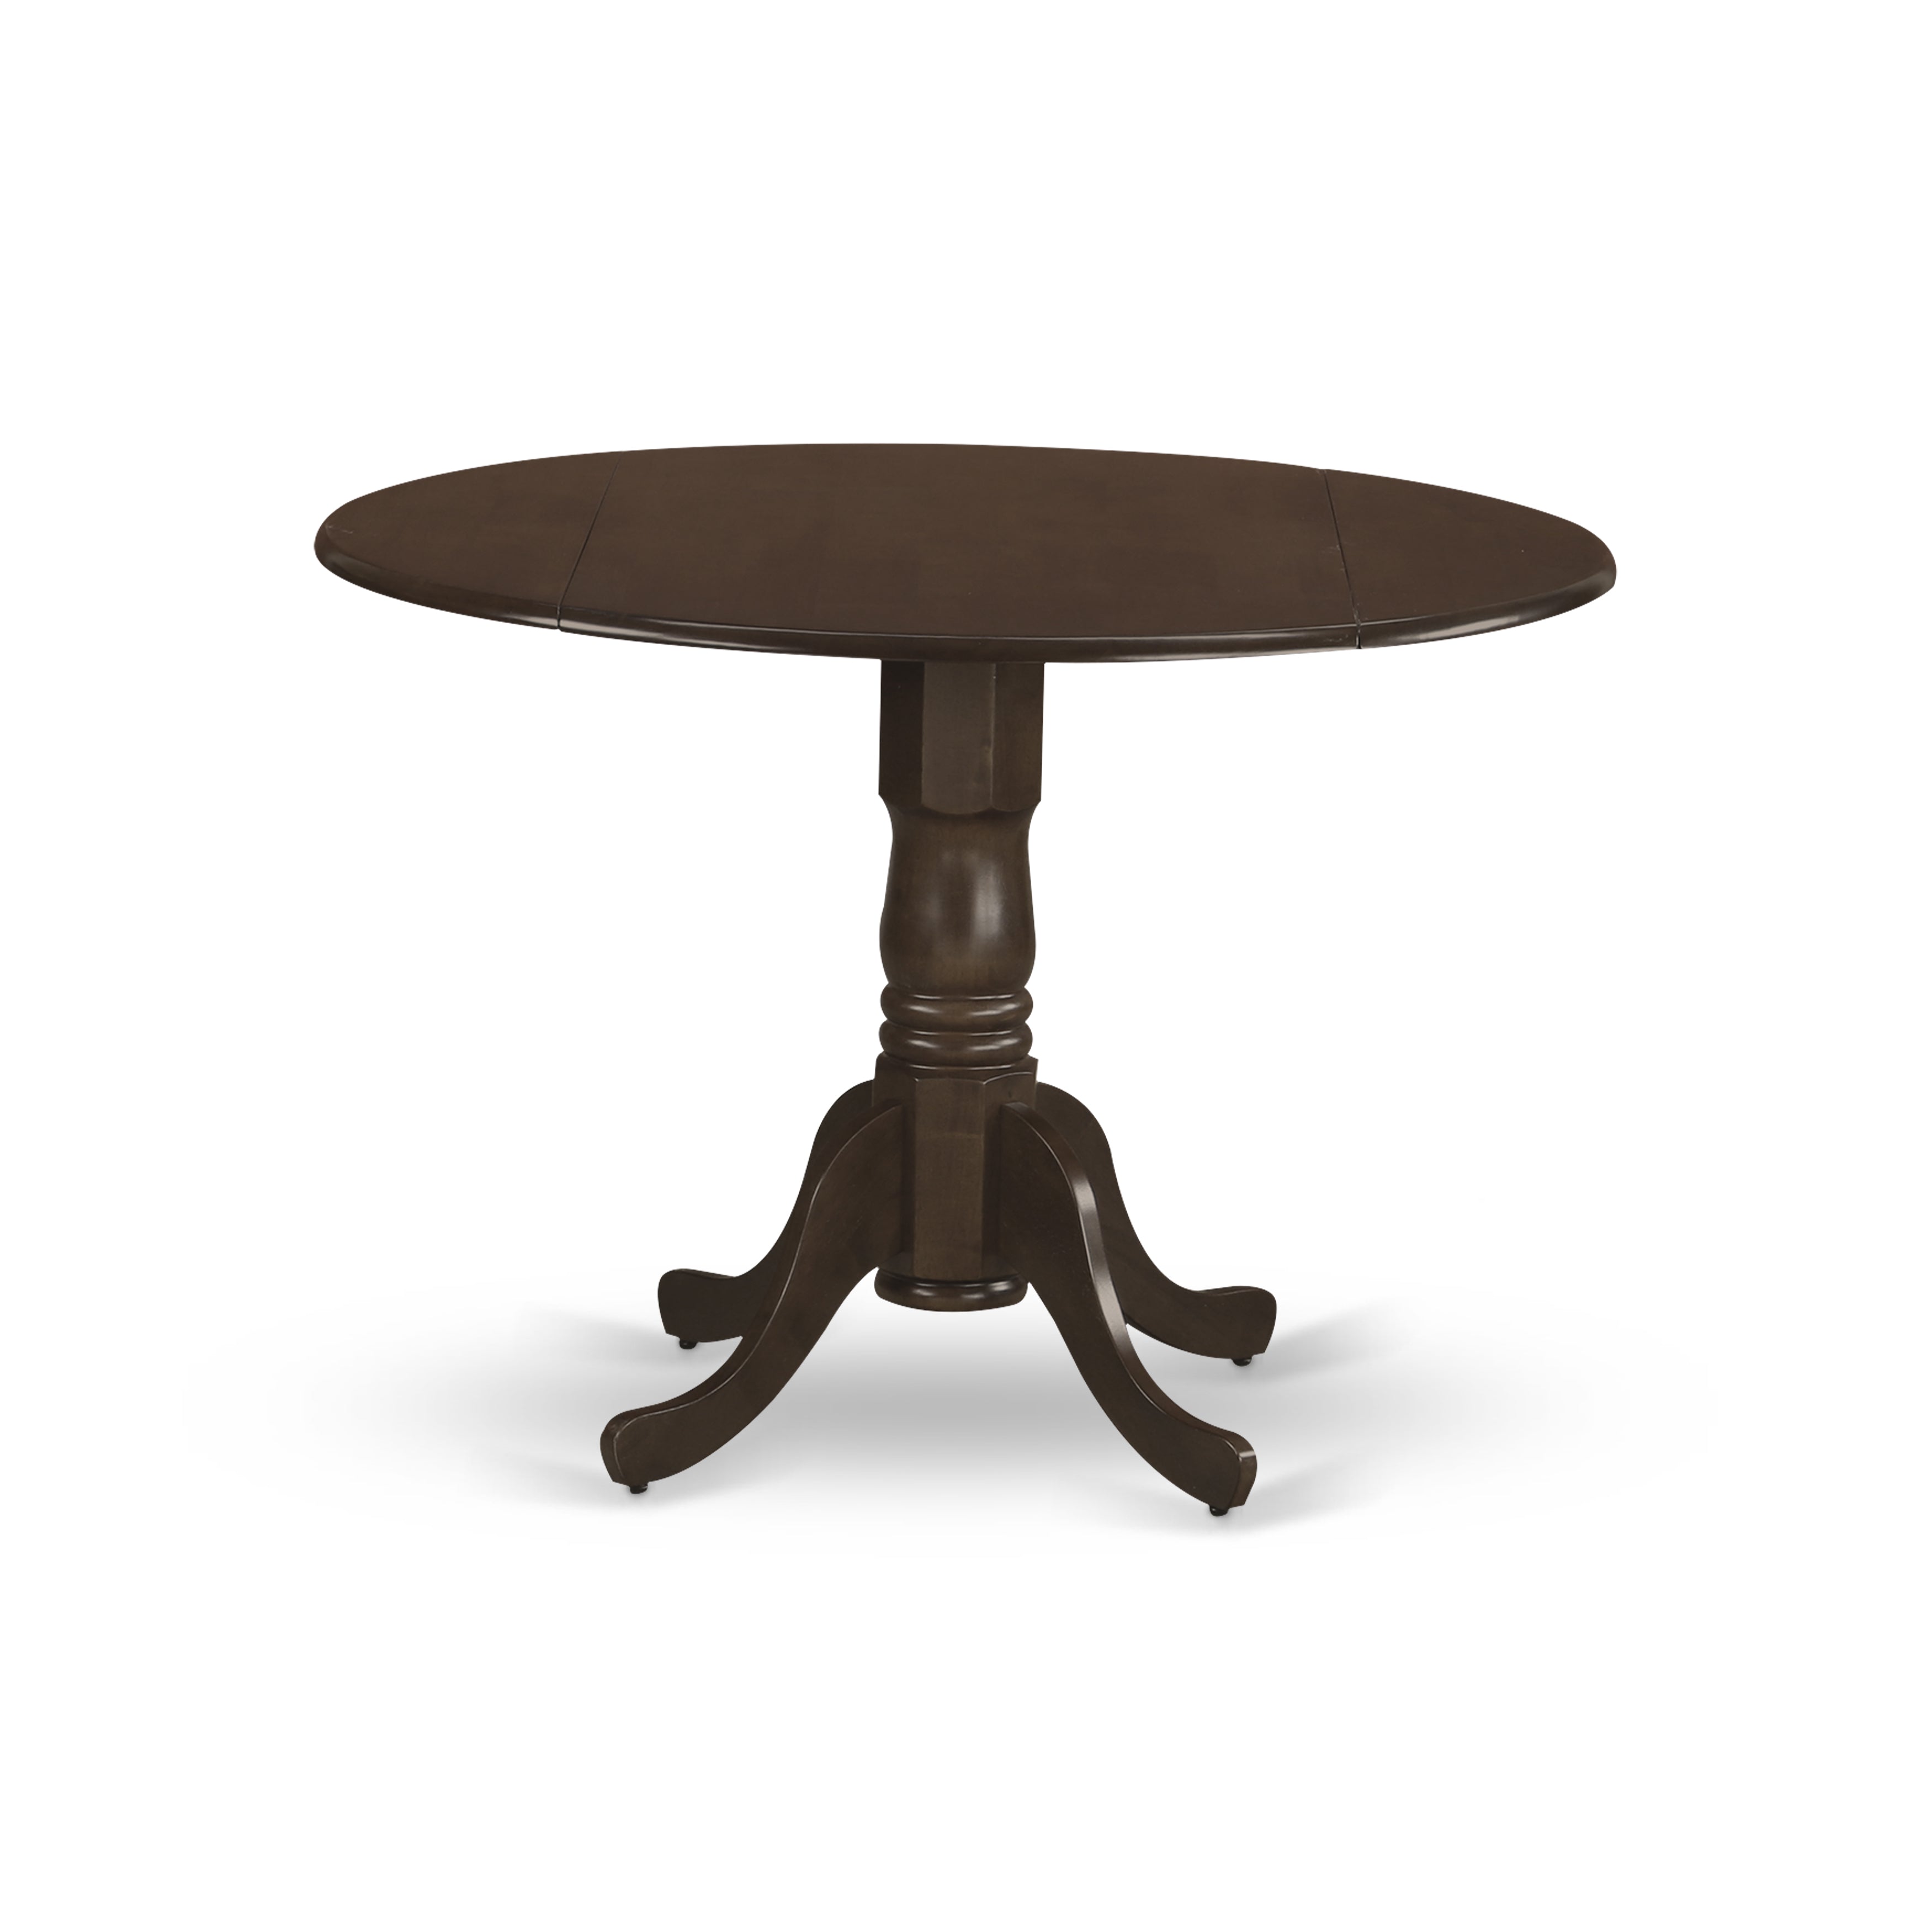 Dunblin Round Wood Dining Table with 29" Drop Leaves in Espresso